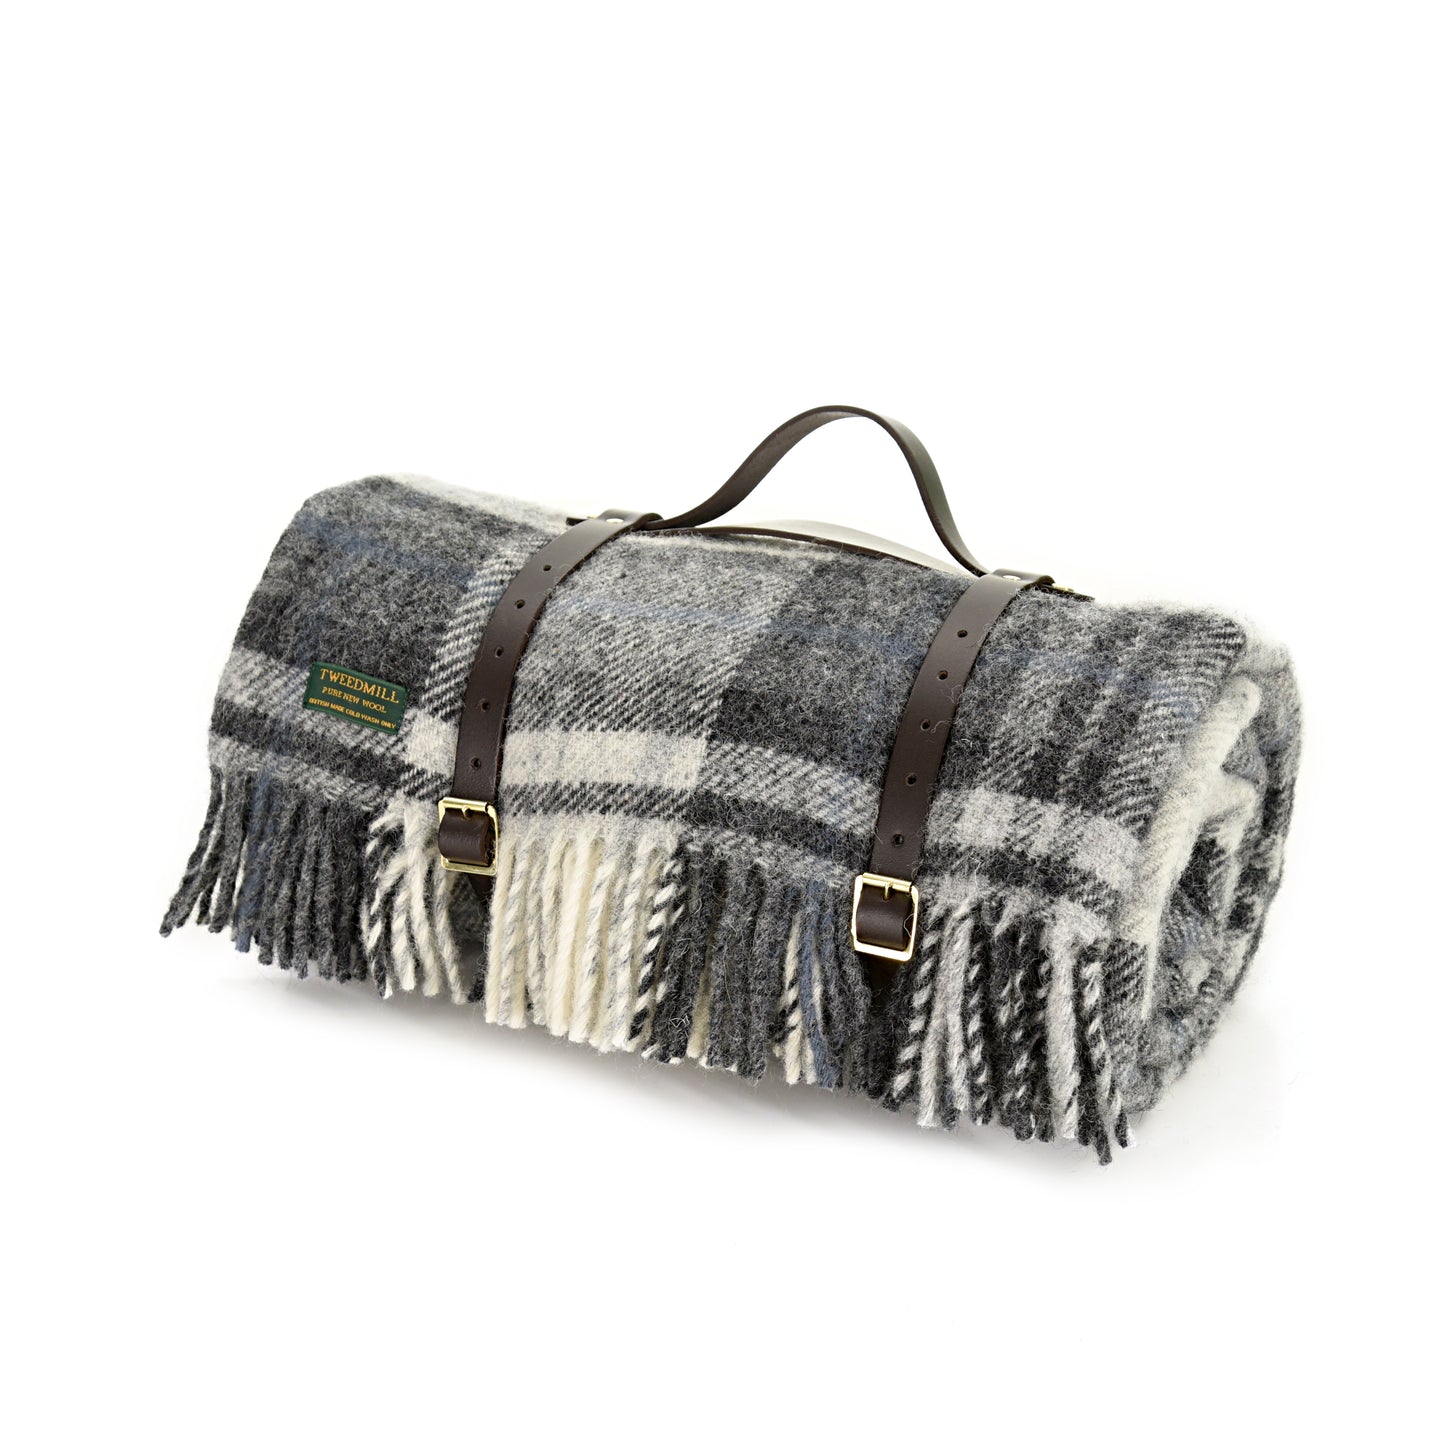 Grey/Black Welsh Picnic Rug With Leather Straps by Tweedmill